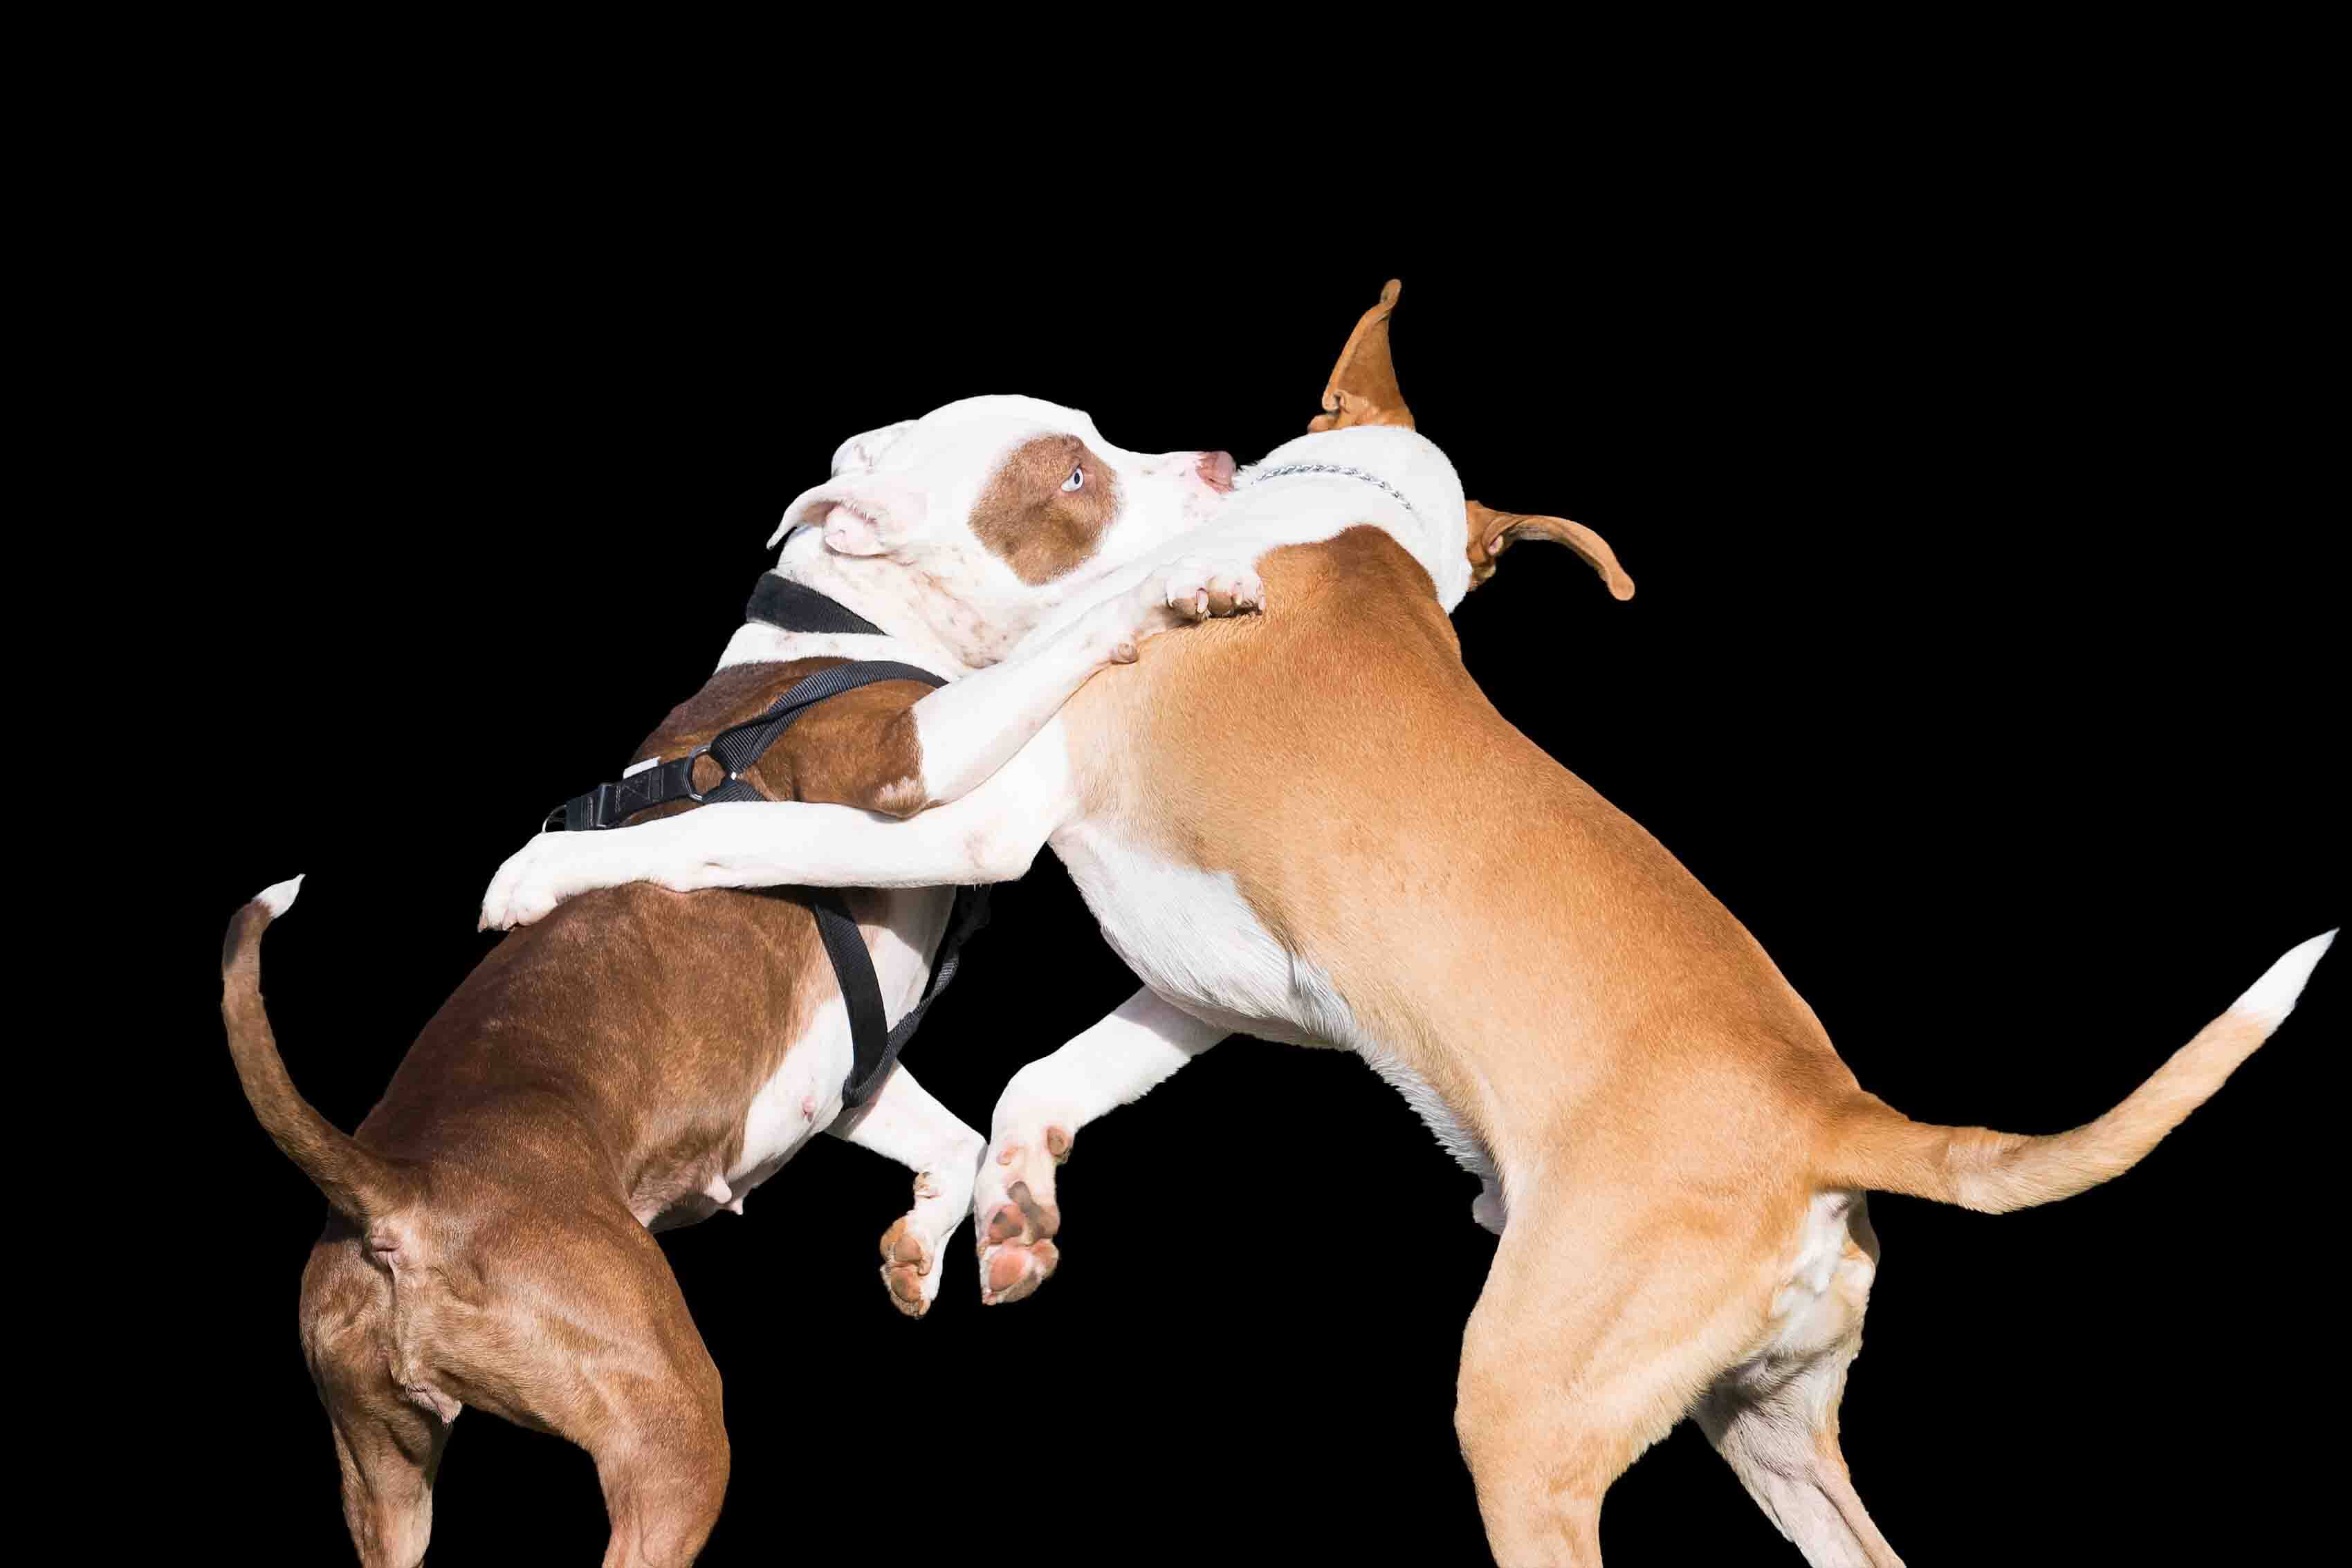  Two Pit Bulls playing rough